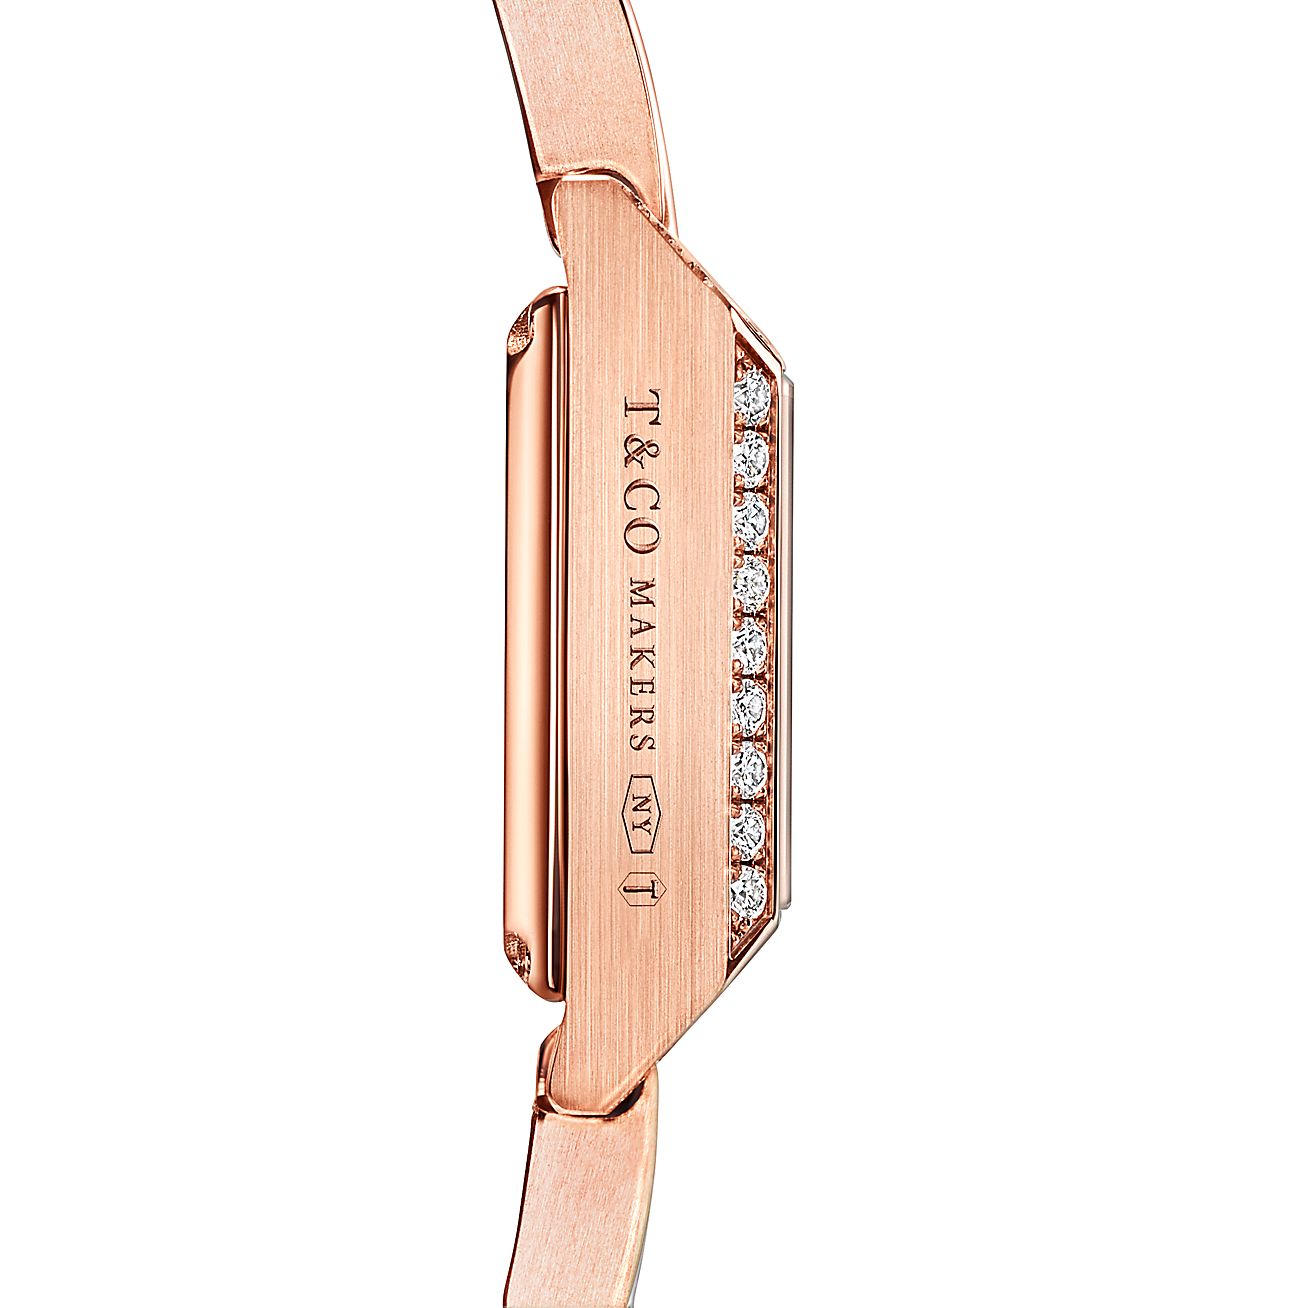 Tiffany 1837 Makers 16 mm Square Watch in Rose Gold with a White Dial